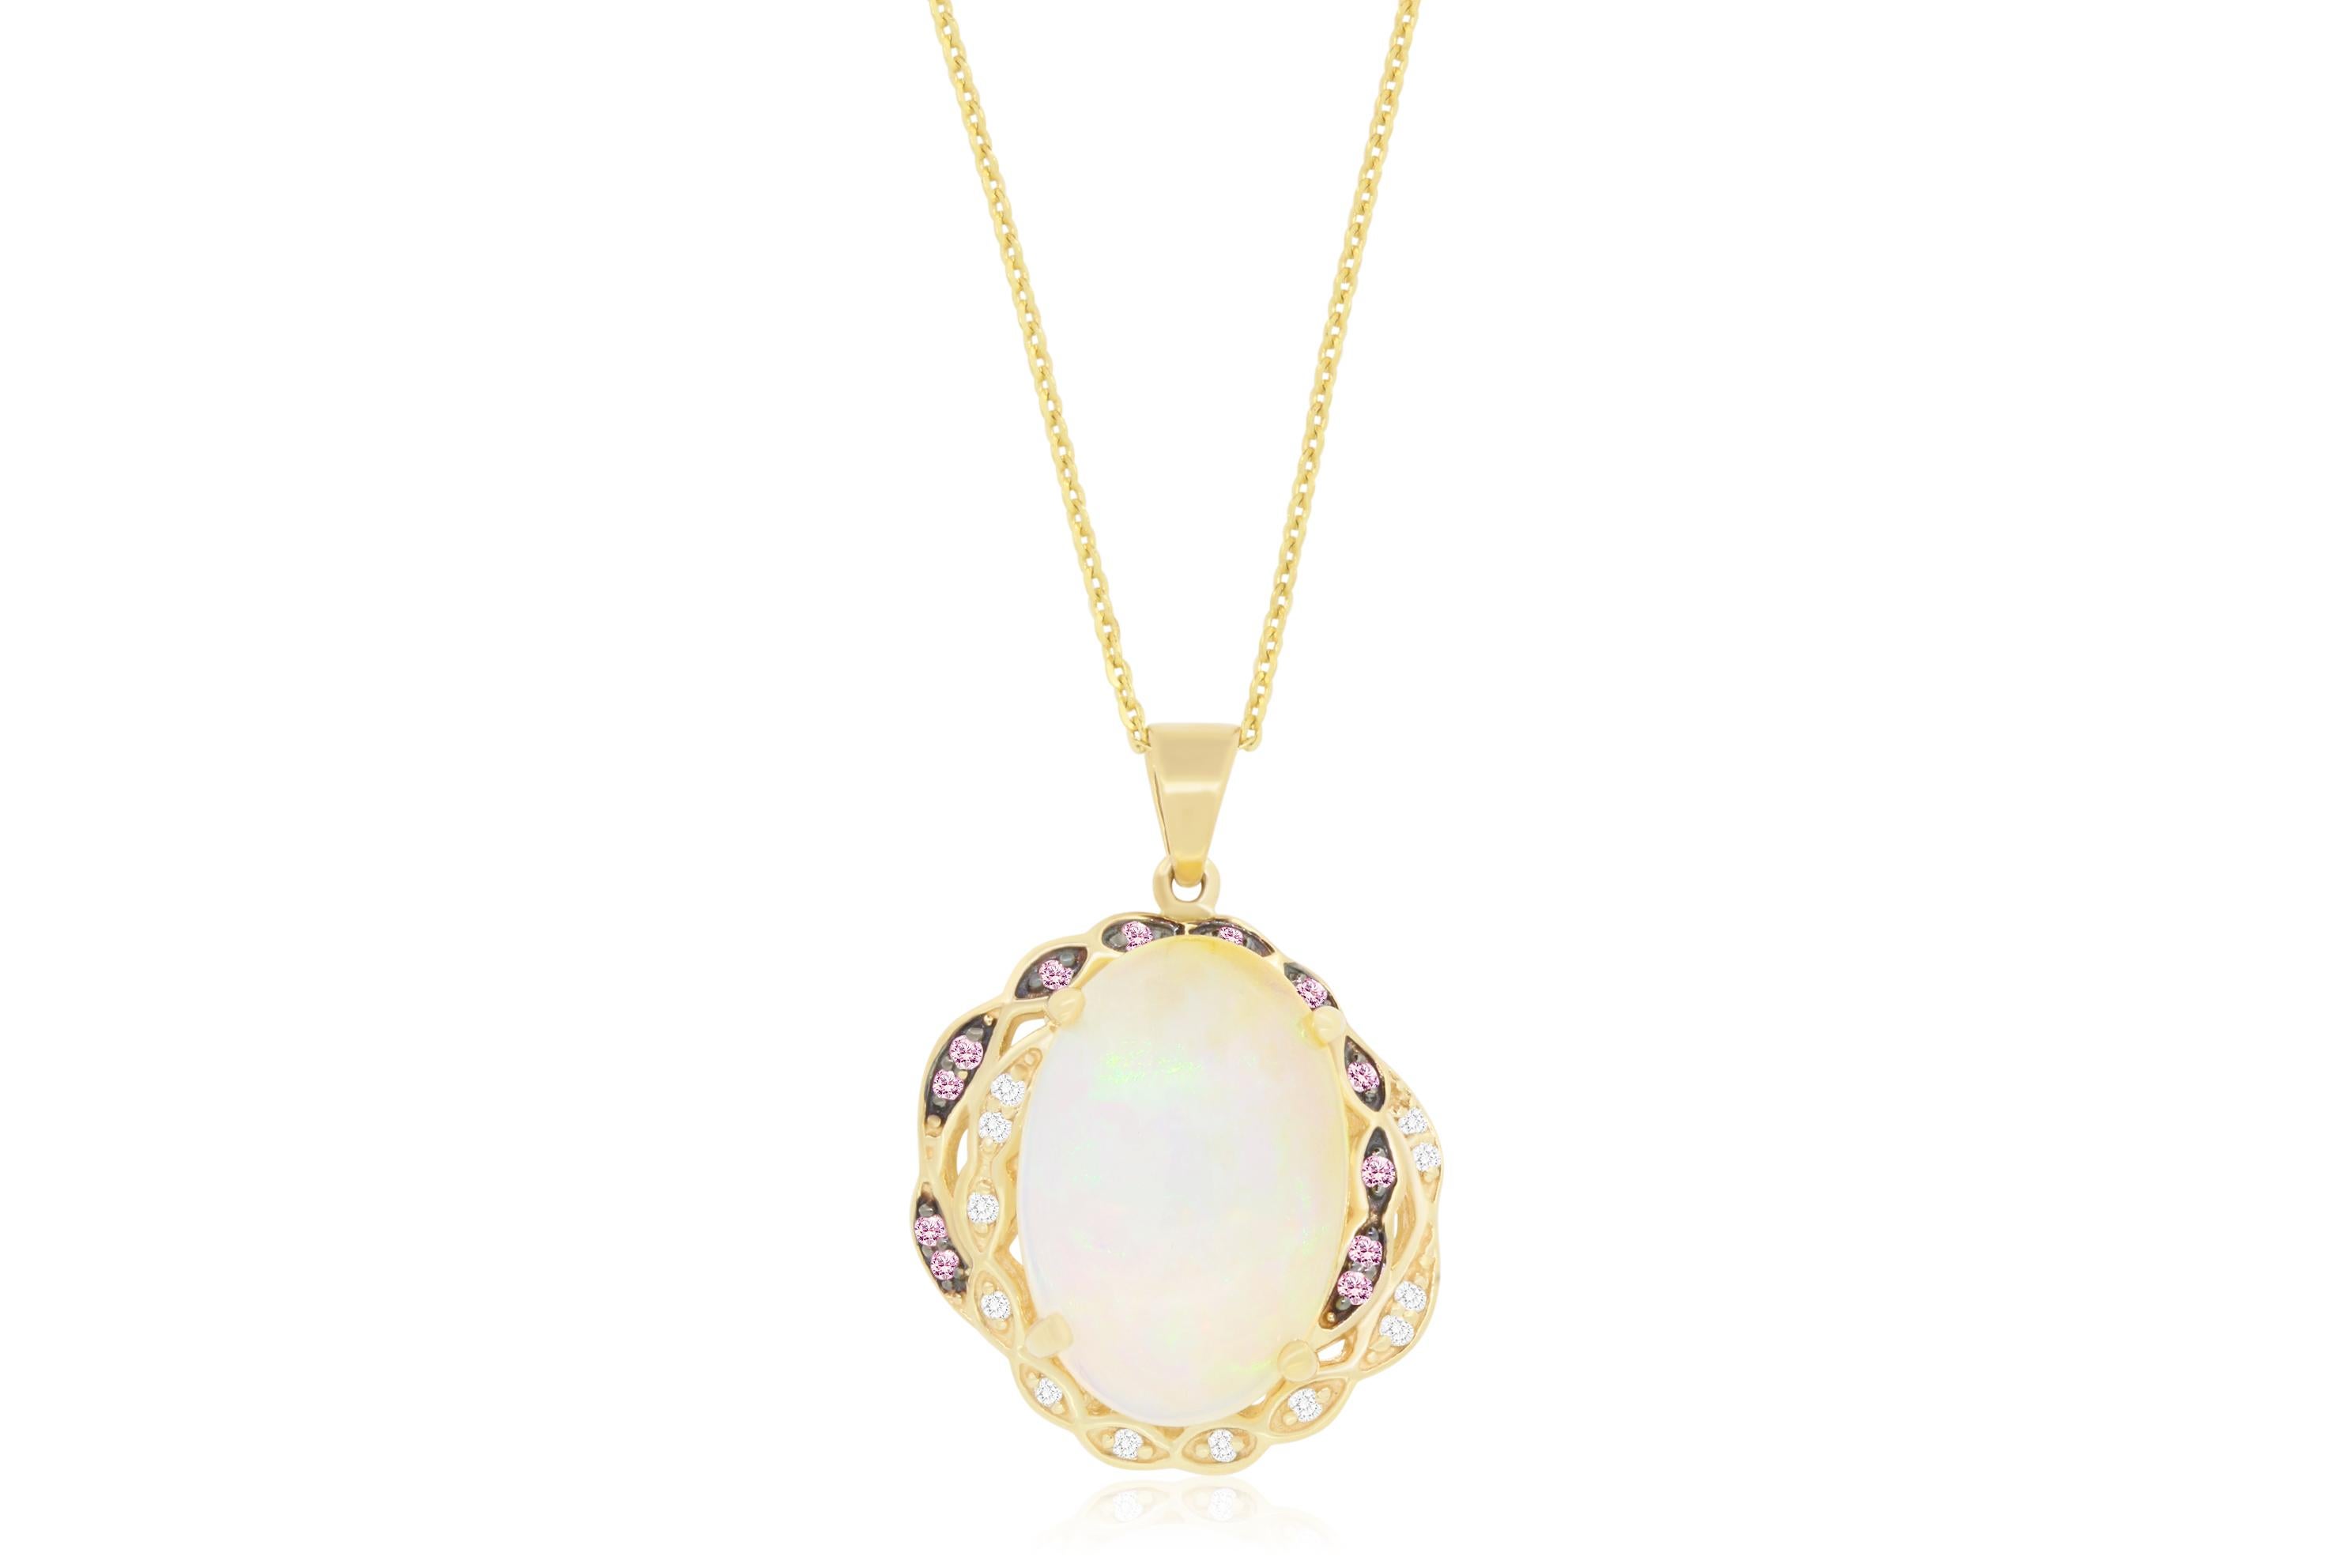 Material: 14k Yellow Gold 
Center Stone Detail:  1 Oval Opal at 6.66 Carats
Mounting Stone Details:  12 Round Pink Sapphires at 0.10 carat
Mounting Stone Details: 12 Brilliant Round White Diamonds at 0.08 Carats - Clarity: SI / Color
Chain Length: 